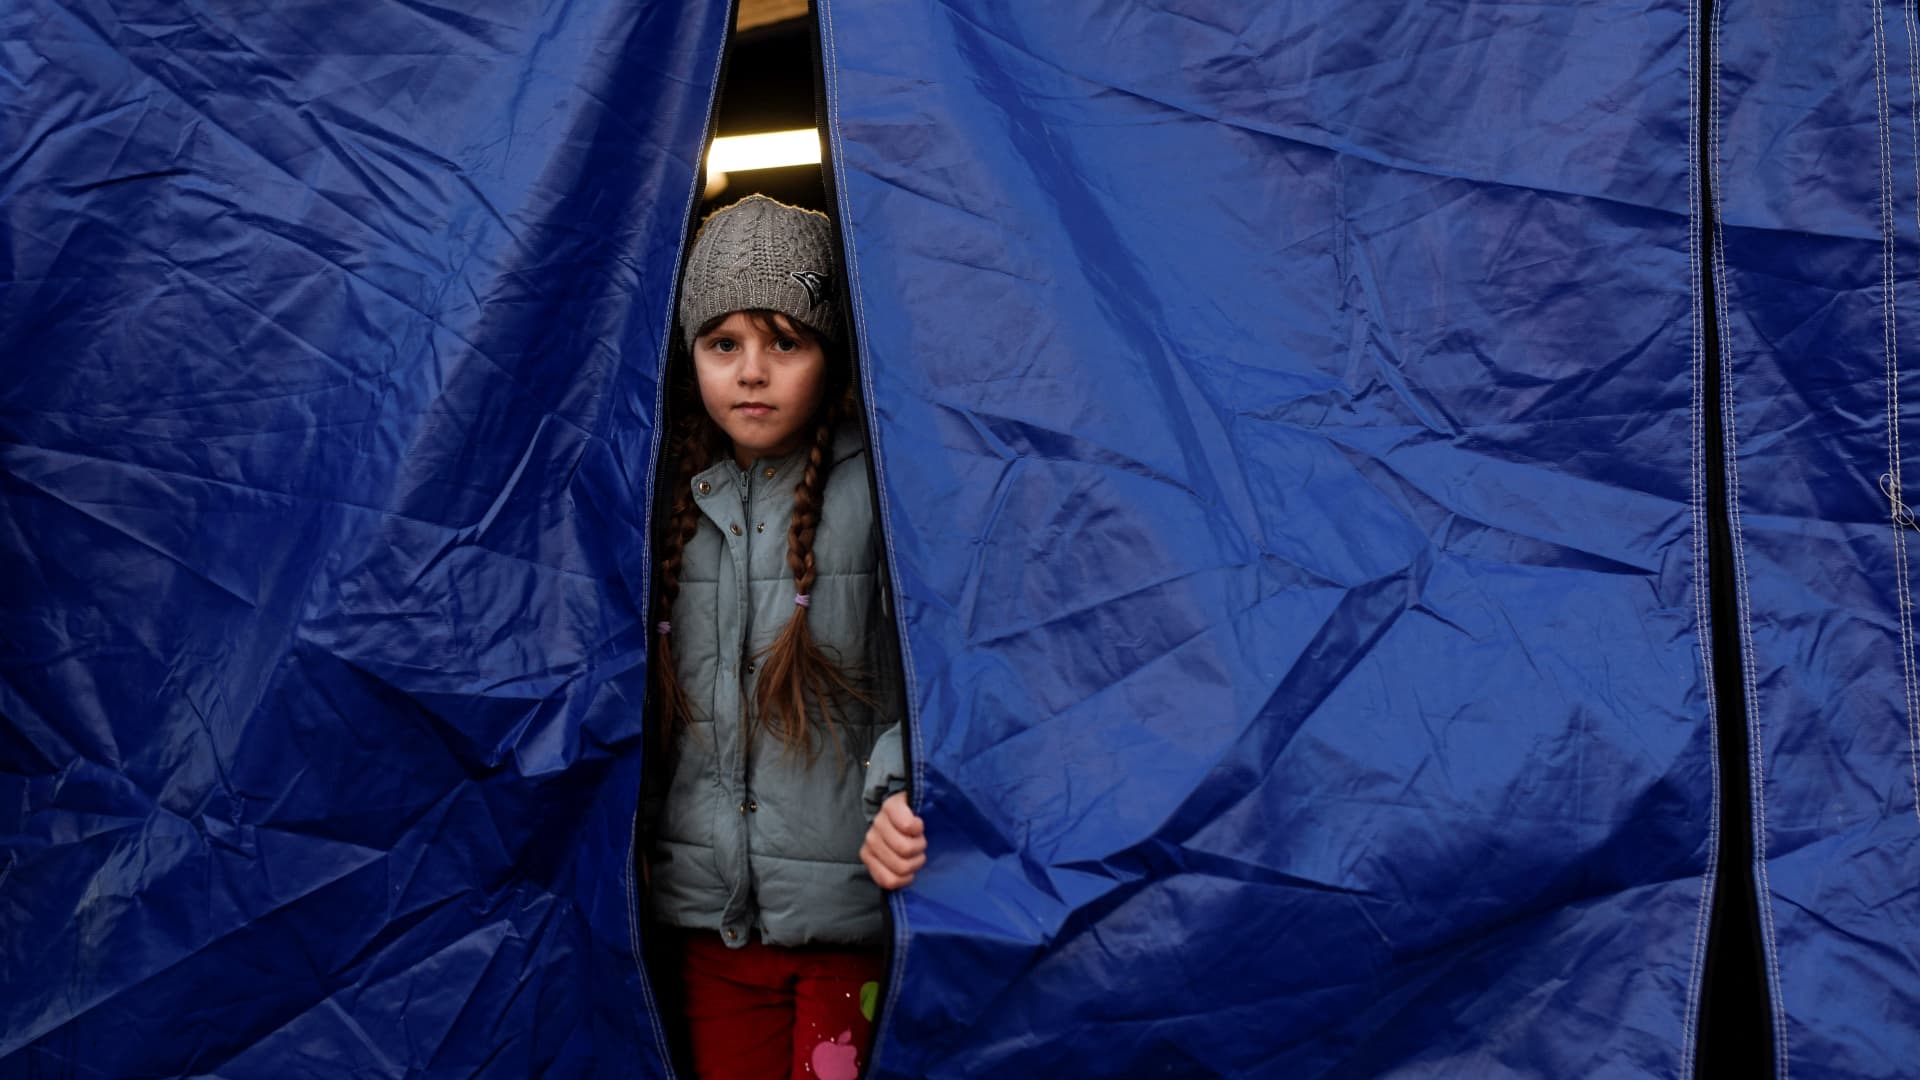 An Ukrainian child looks out of a tent while waiting for relocation after crossing the Ukrainian-Romanian border in Siret, northern Romania, on March 19, 2022.